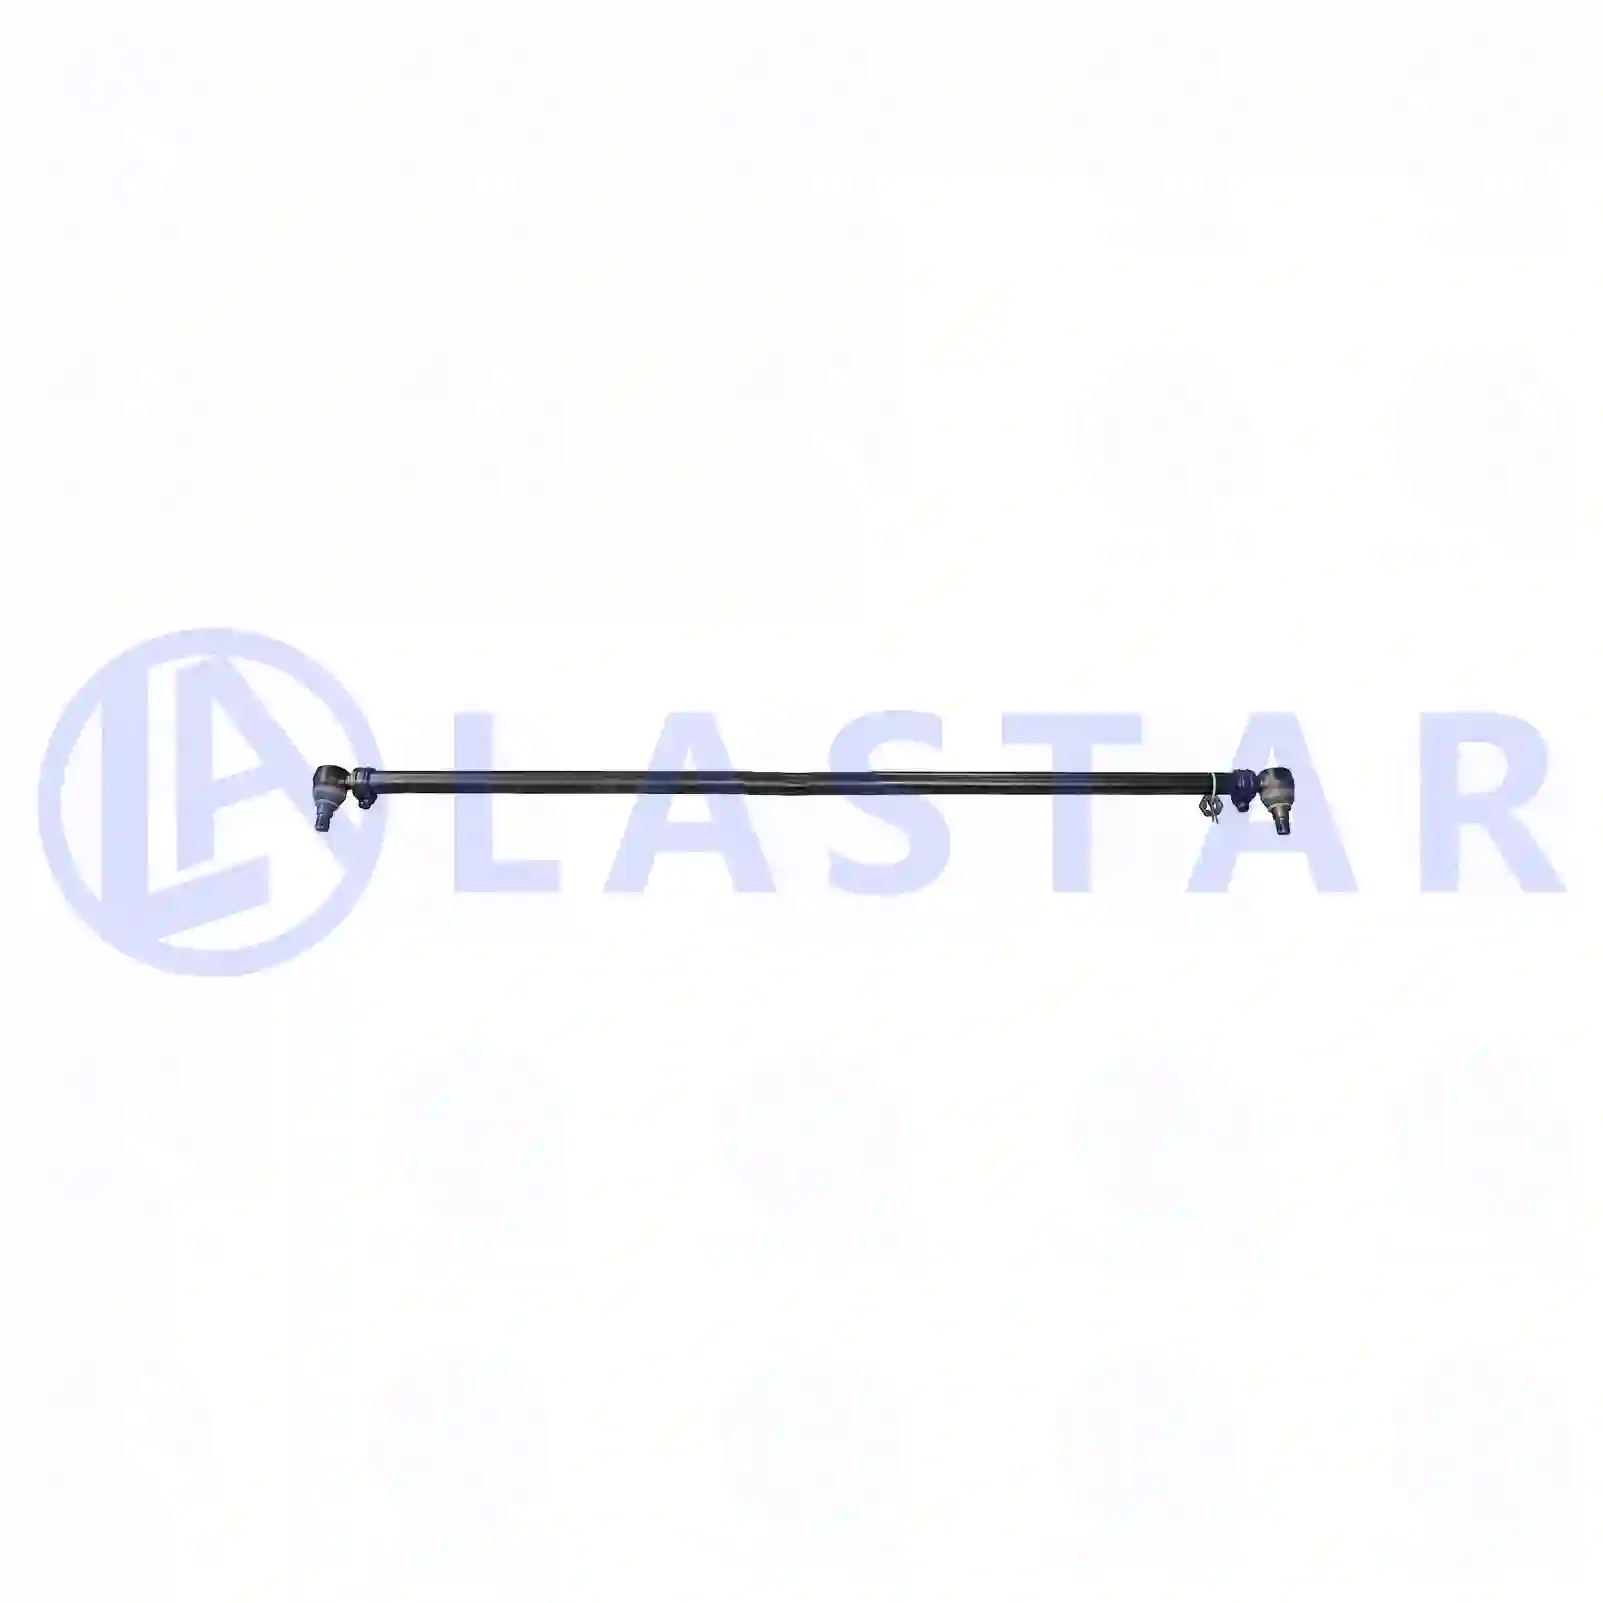 Track rod, 77731163, 7420713860, 20713860, , , ||  77731163 Lastar Spare Part | Truck Spare Parts, Auotomotive Spare Parts Track rod, 77731163, 7420713860, 20713860, , , ||  77731163 Lastar Spare Part | Truck Spare Parts, Auotomotive Spare Parts